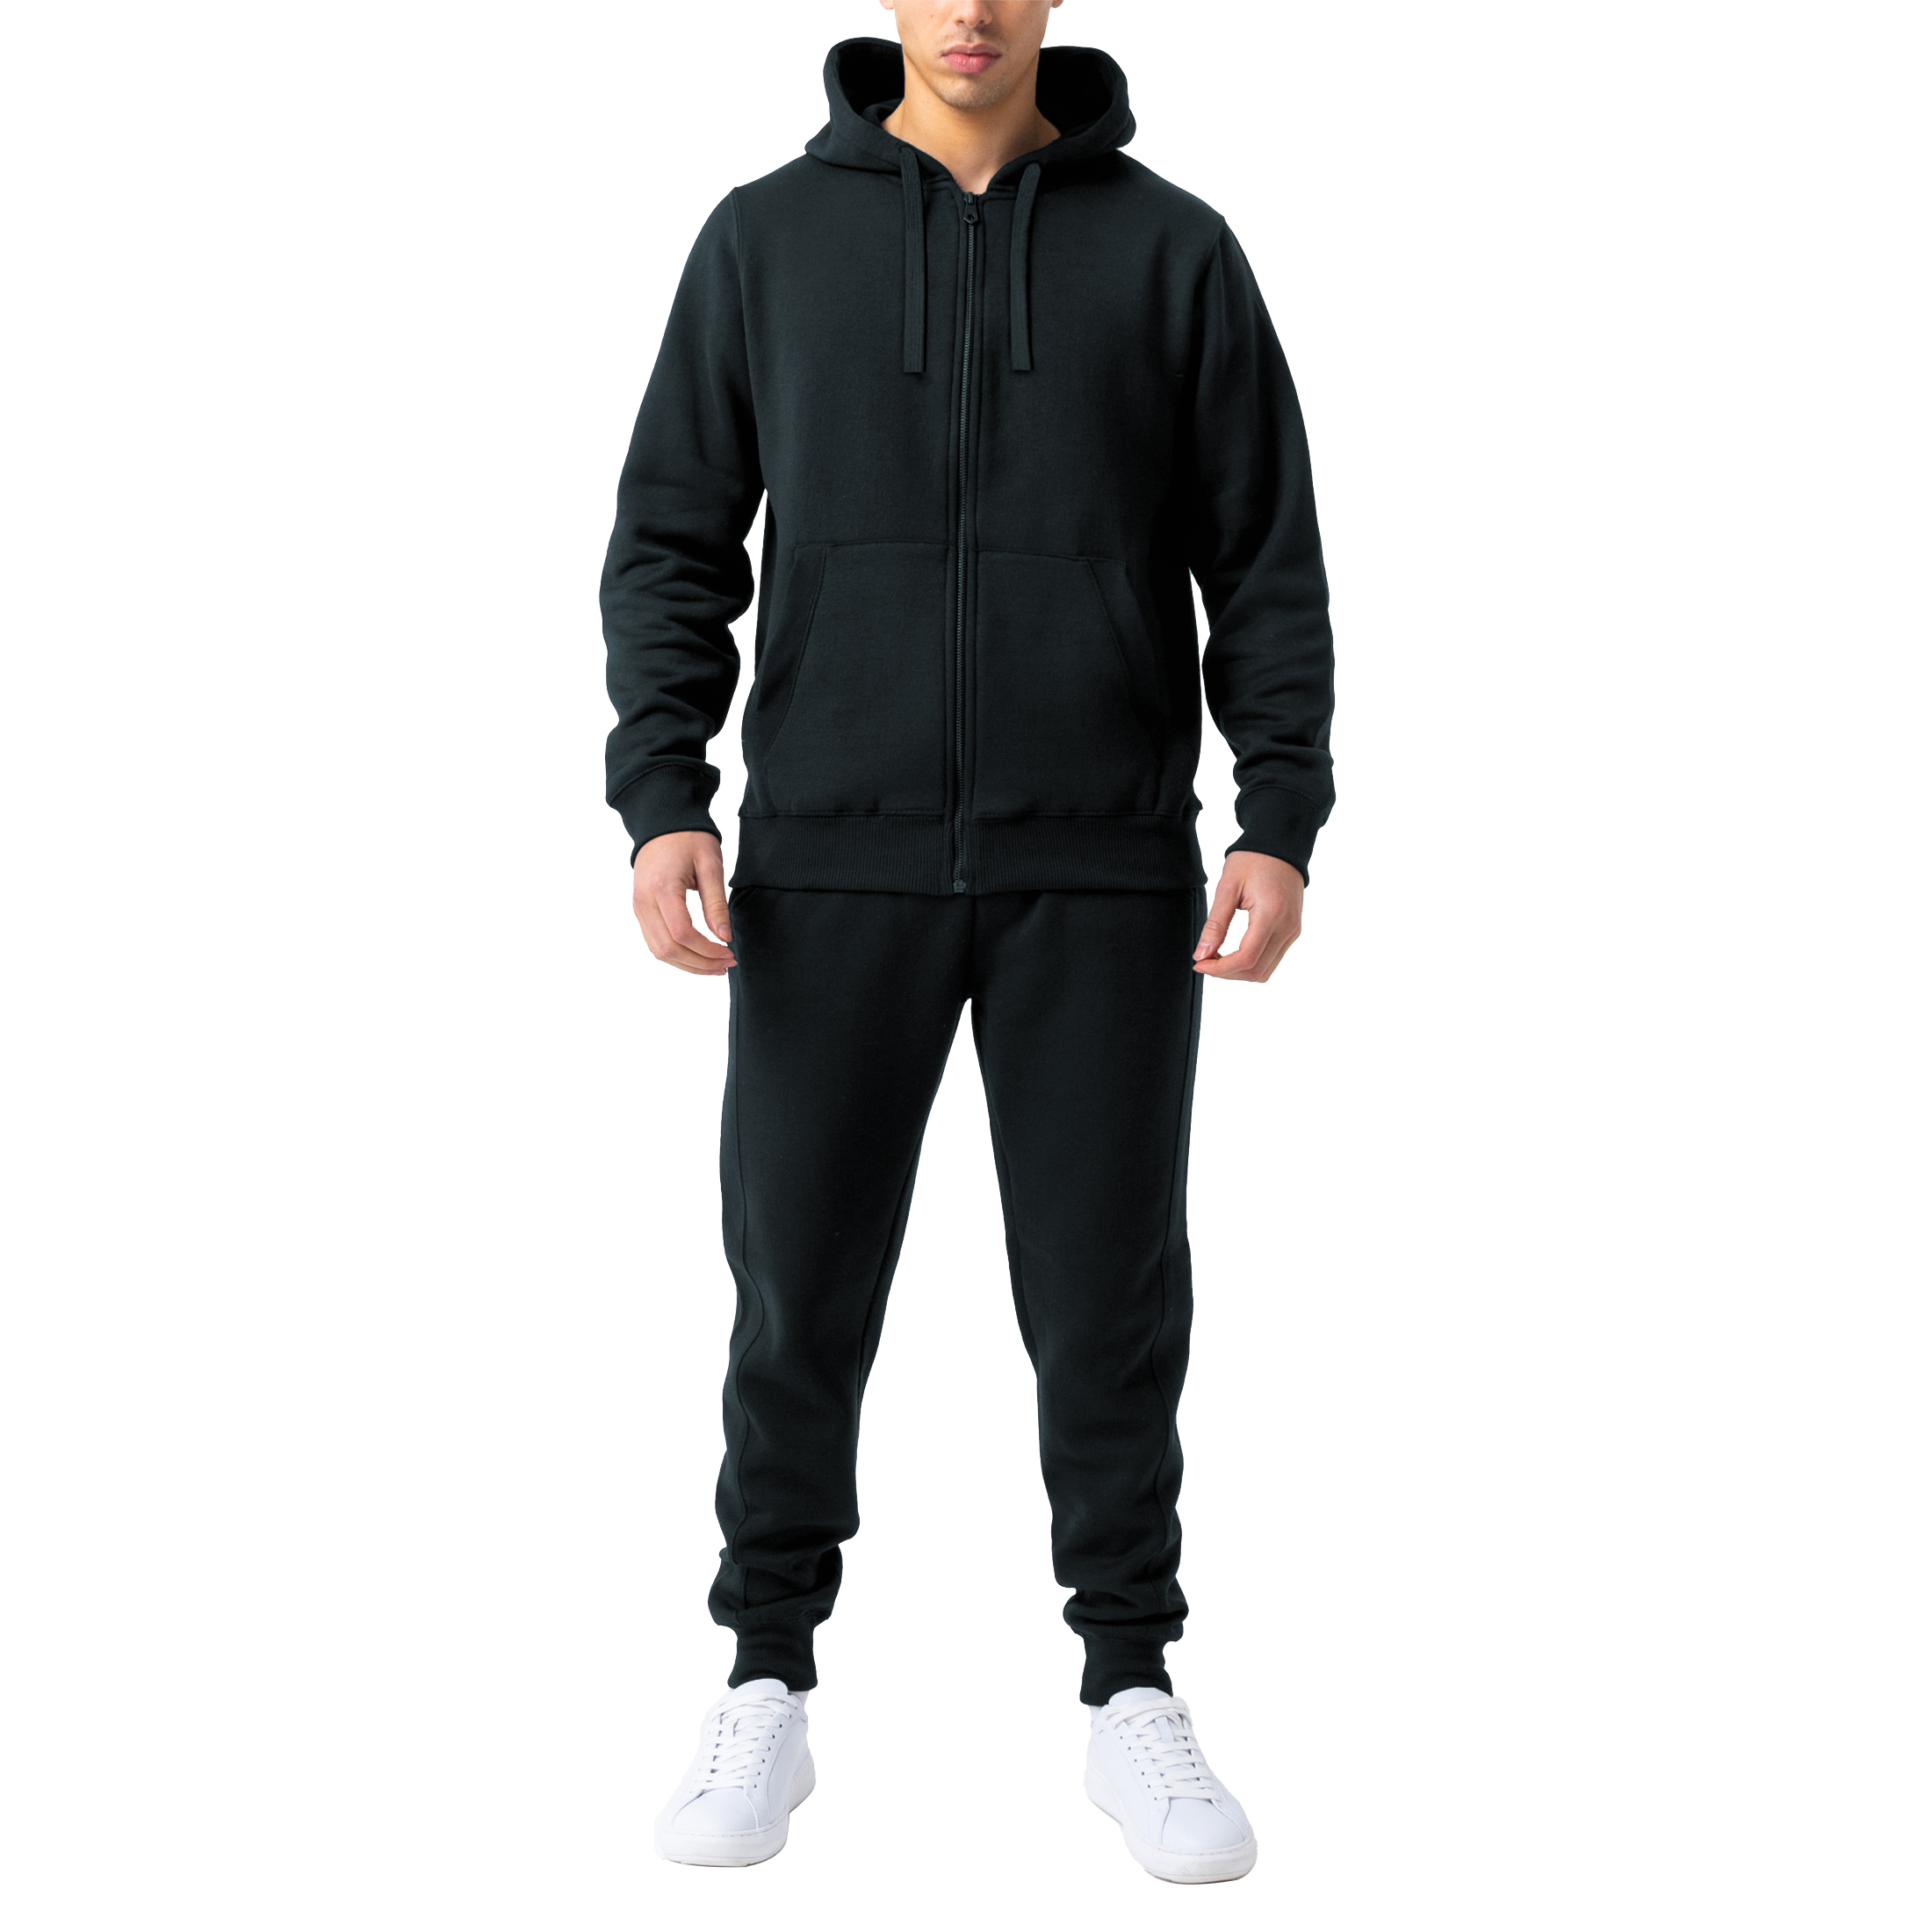 Men's Casual Jogging Athletic Active Full Zip Up Tracksuit - Black, 4X-Large